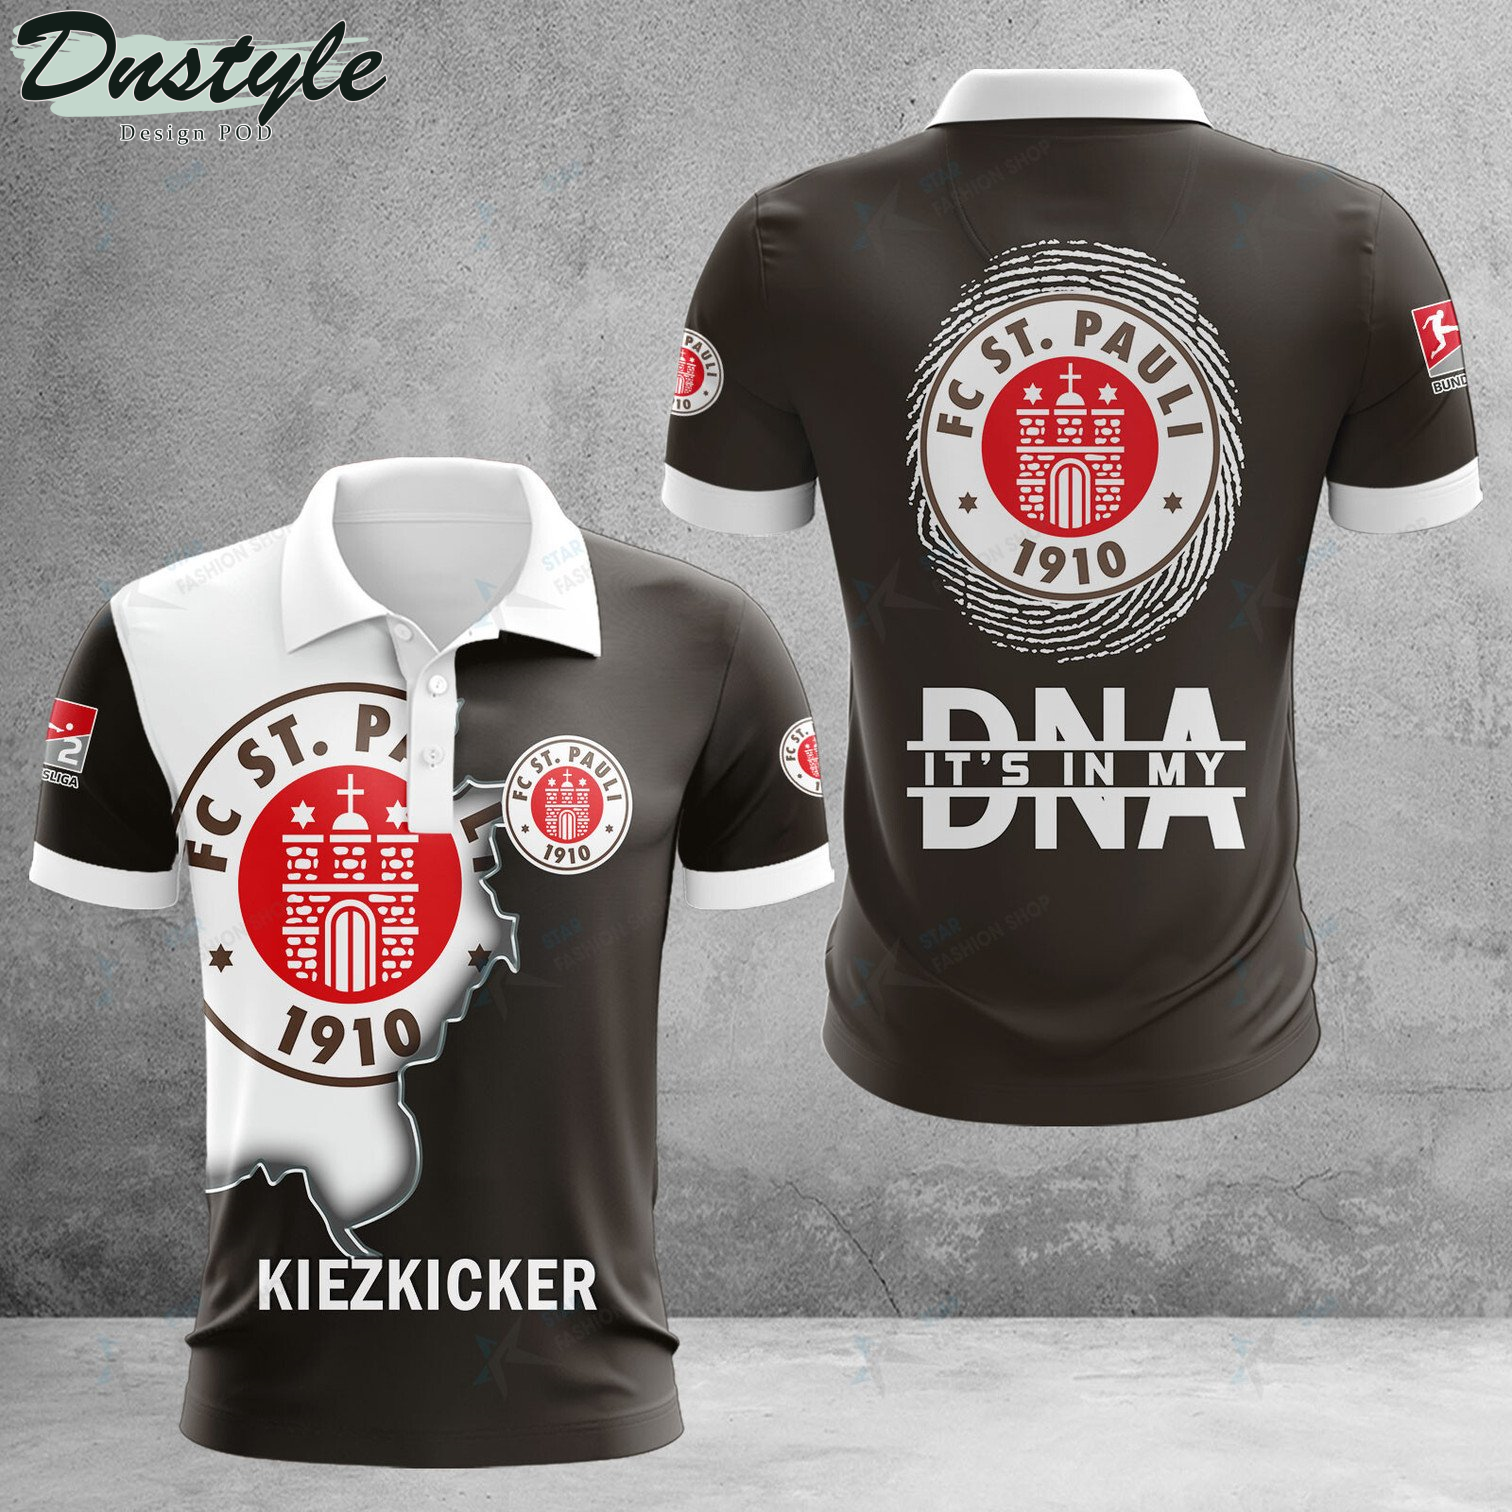 FC St. Pauli it's in my DNA polo shirt